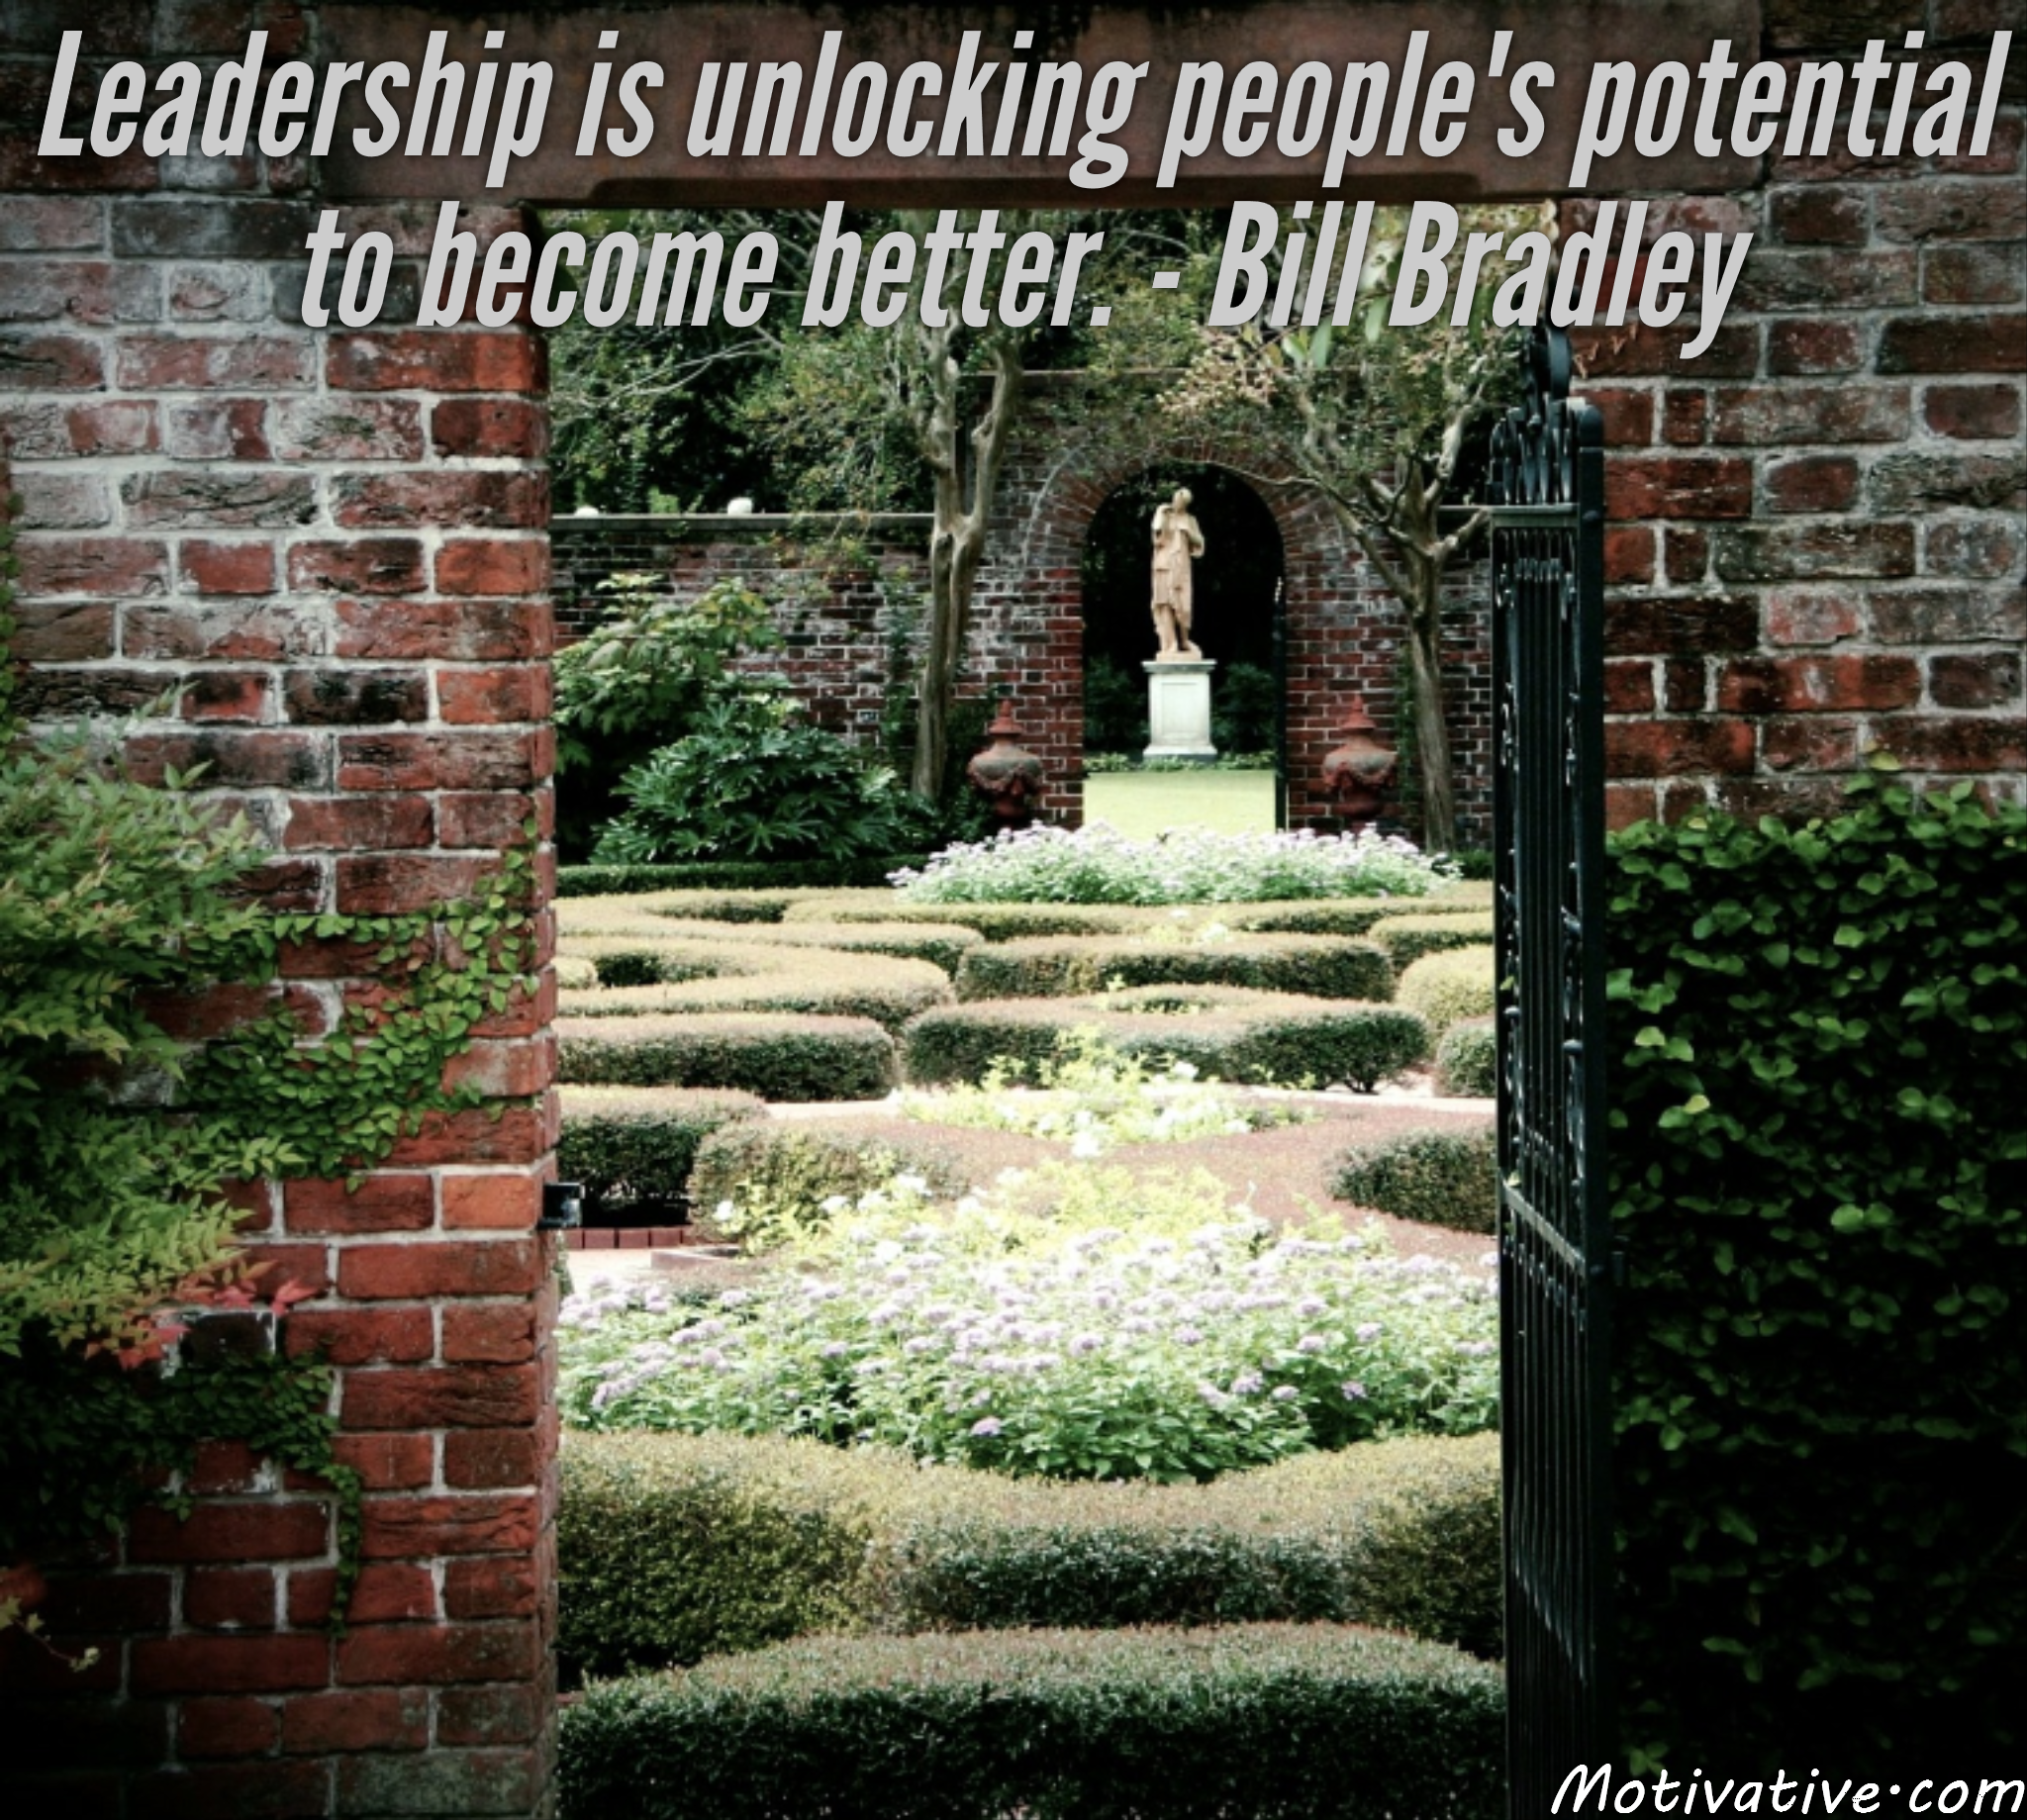 Leadership is unlocking people’s potential to become better. – Bill Bradley